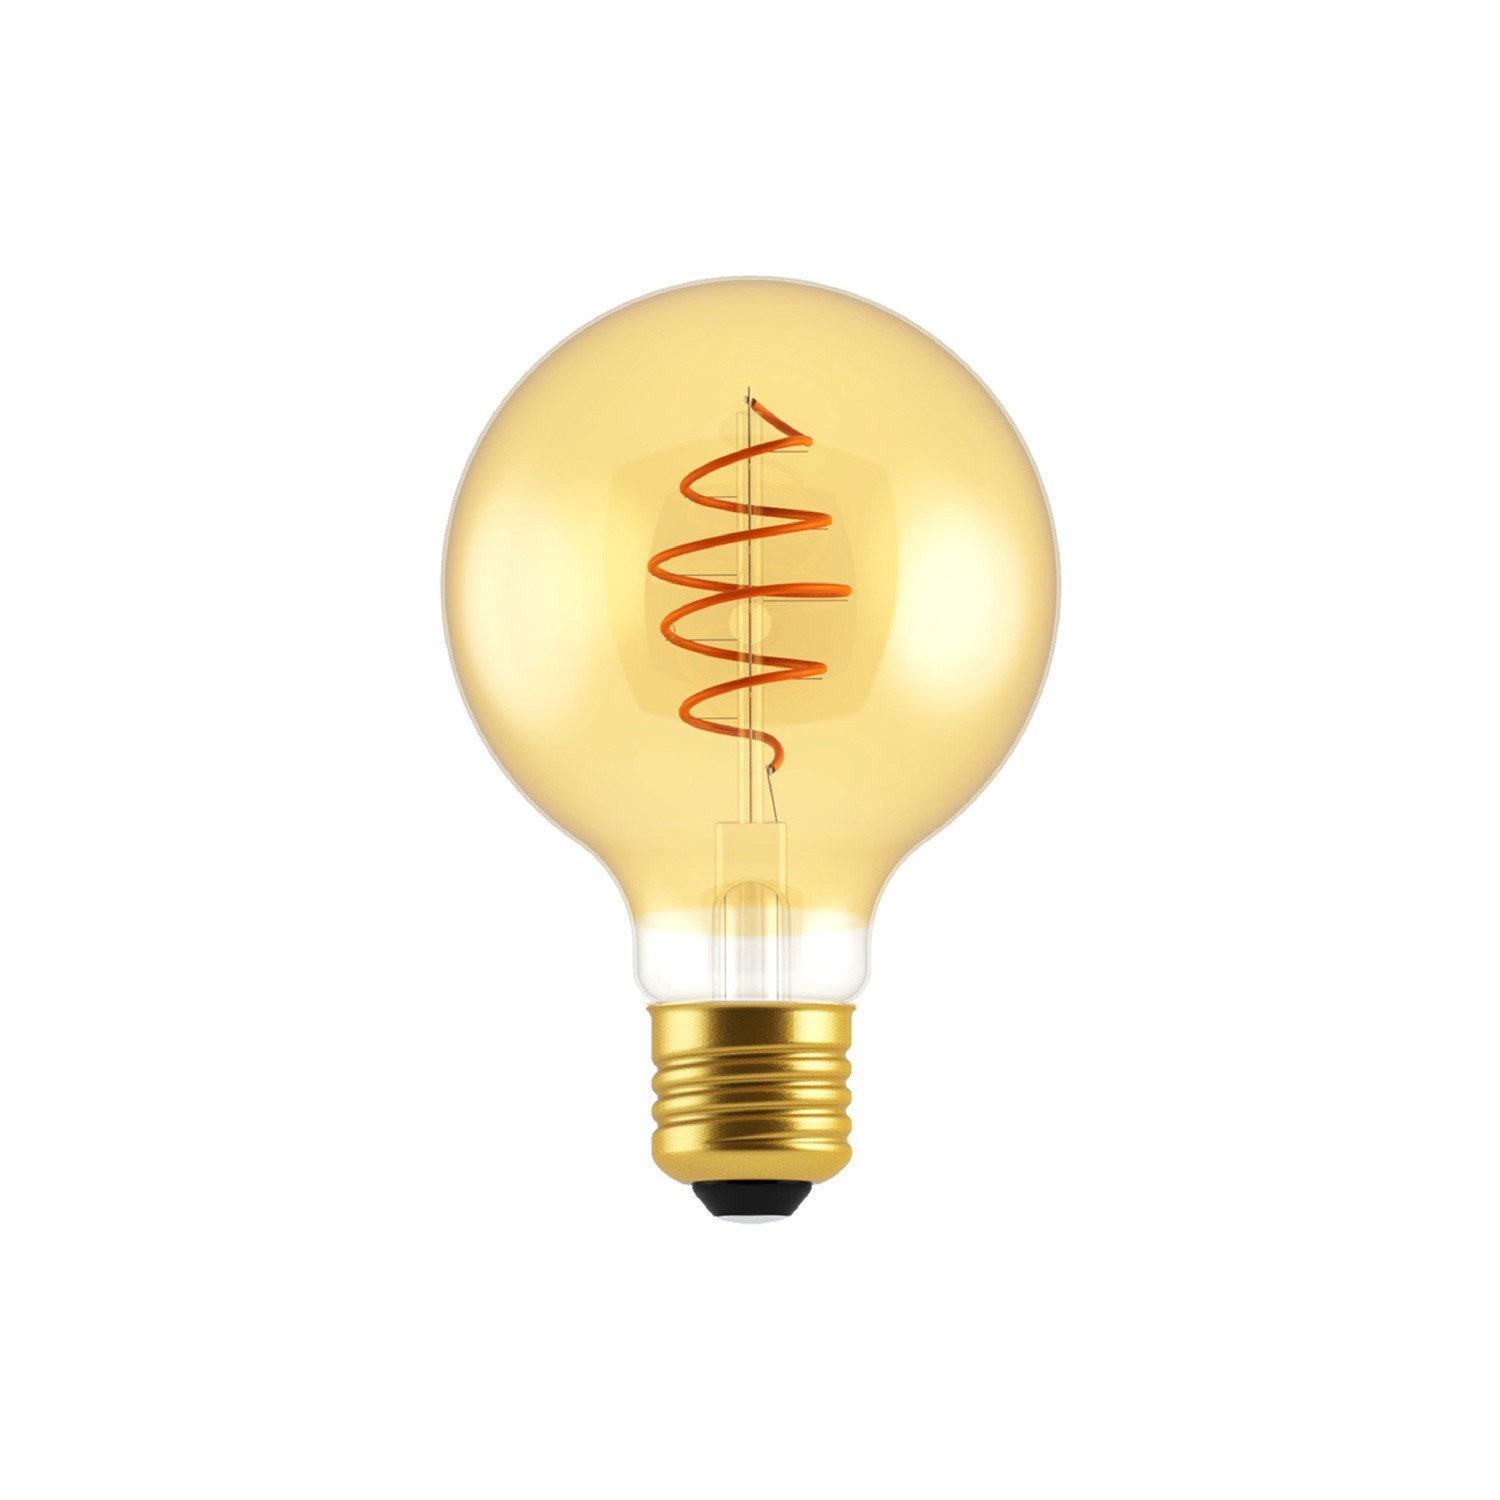 LED Light Light Bulb Globe G80 Golden Croissant Line with Spiral Filament 4.9W 400Lm E27 2200K Dimmable